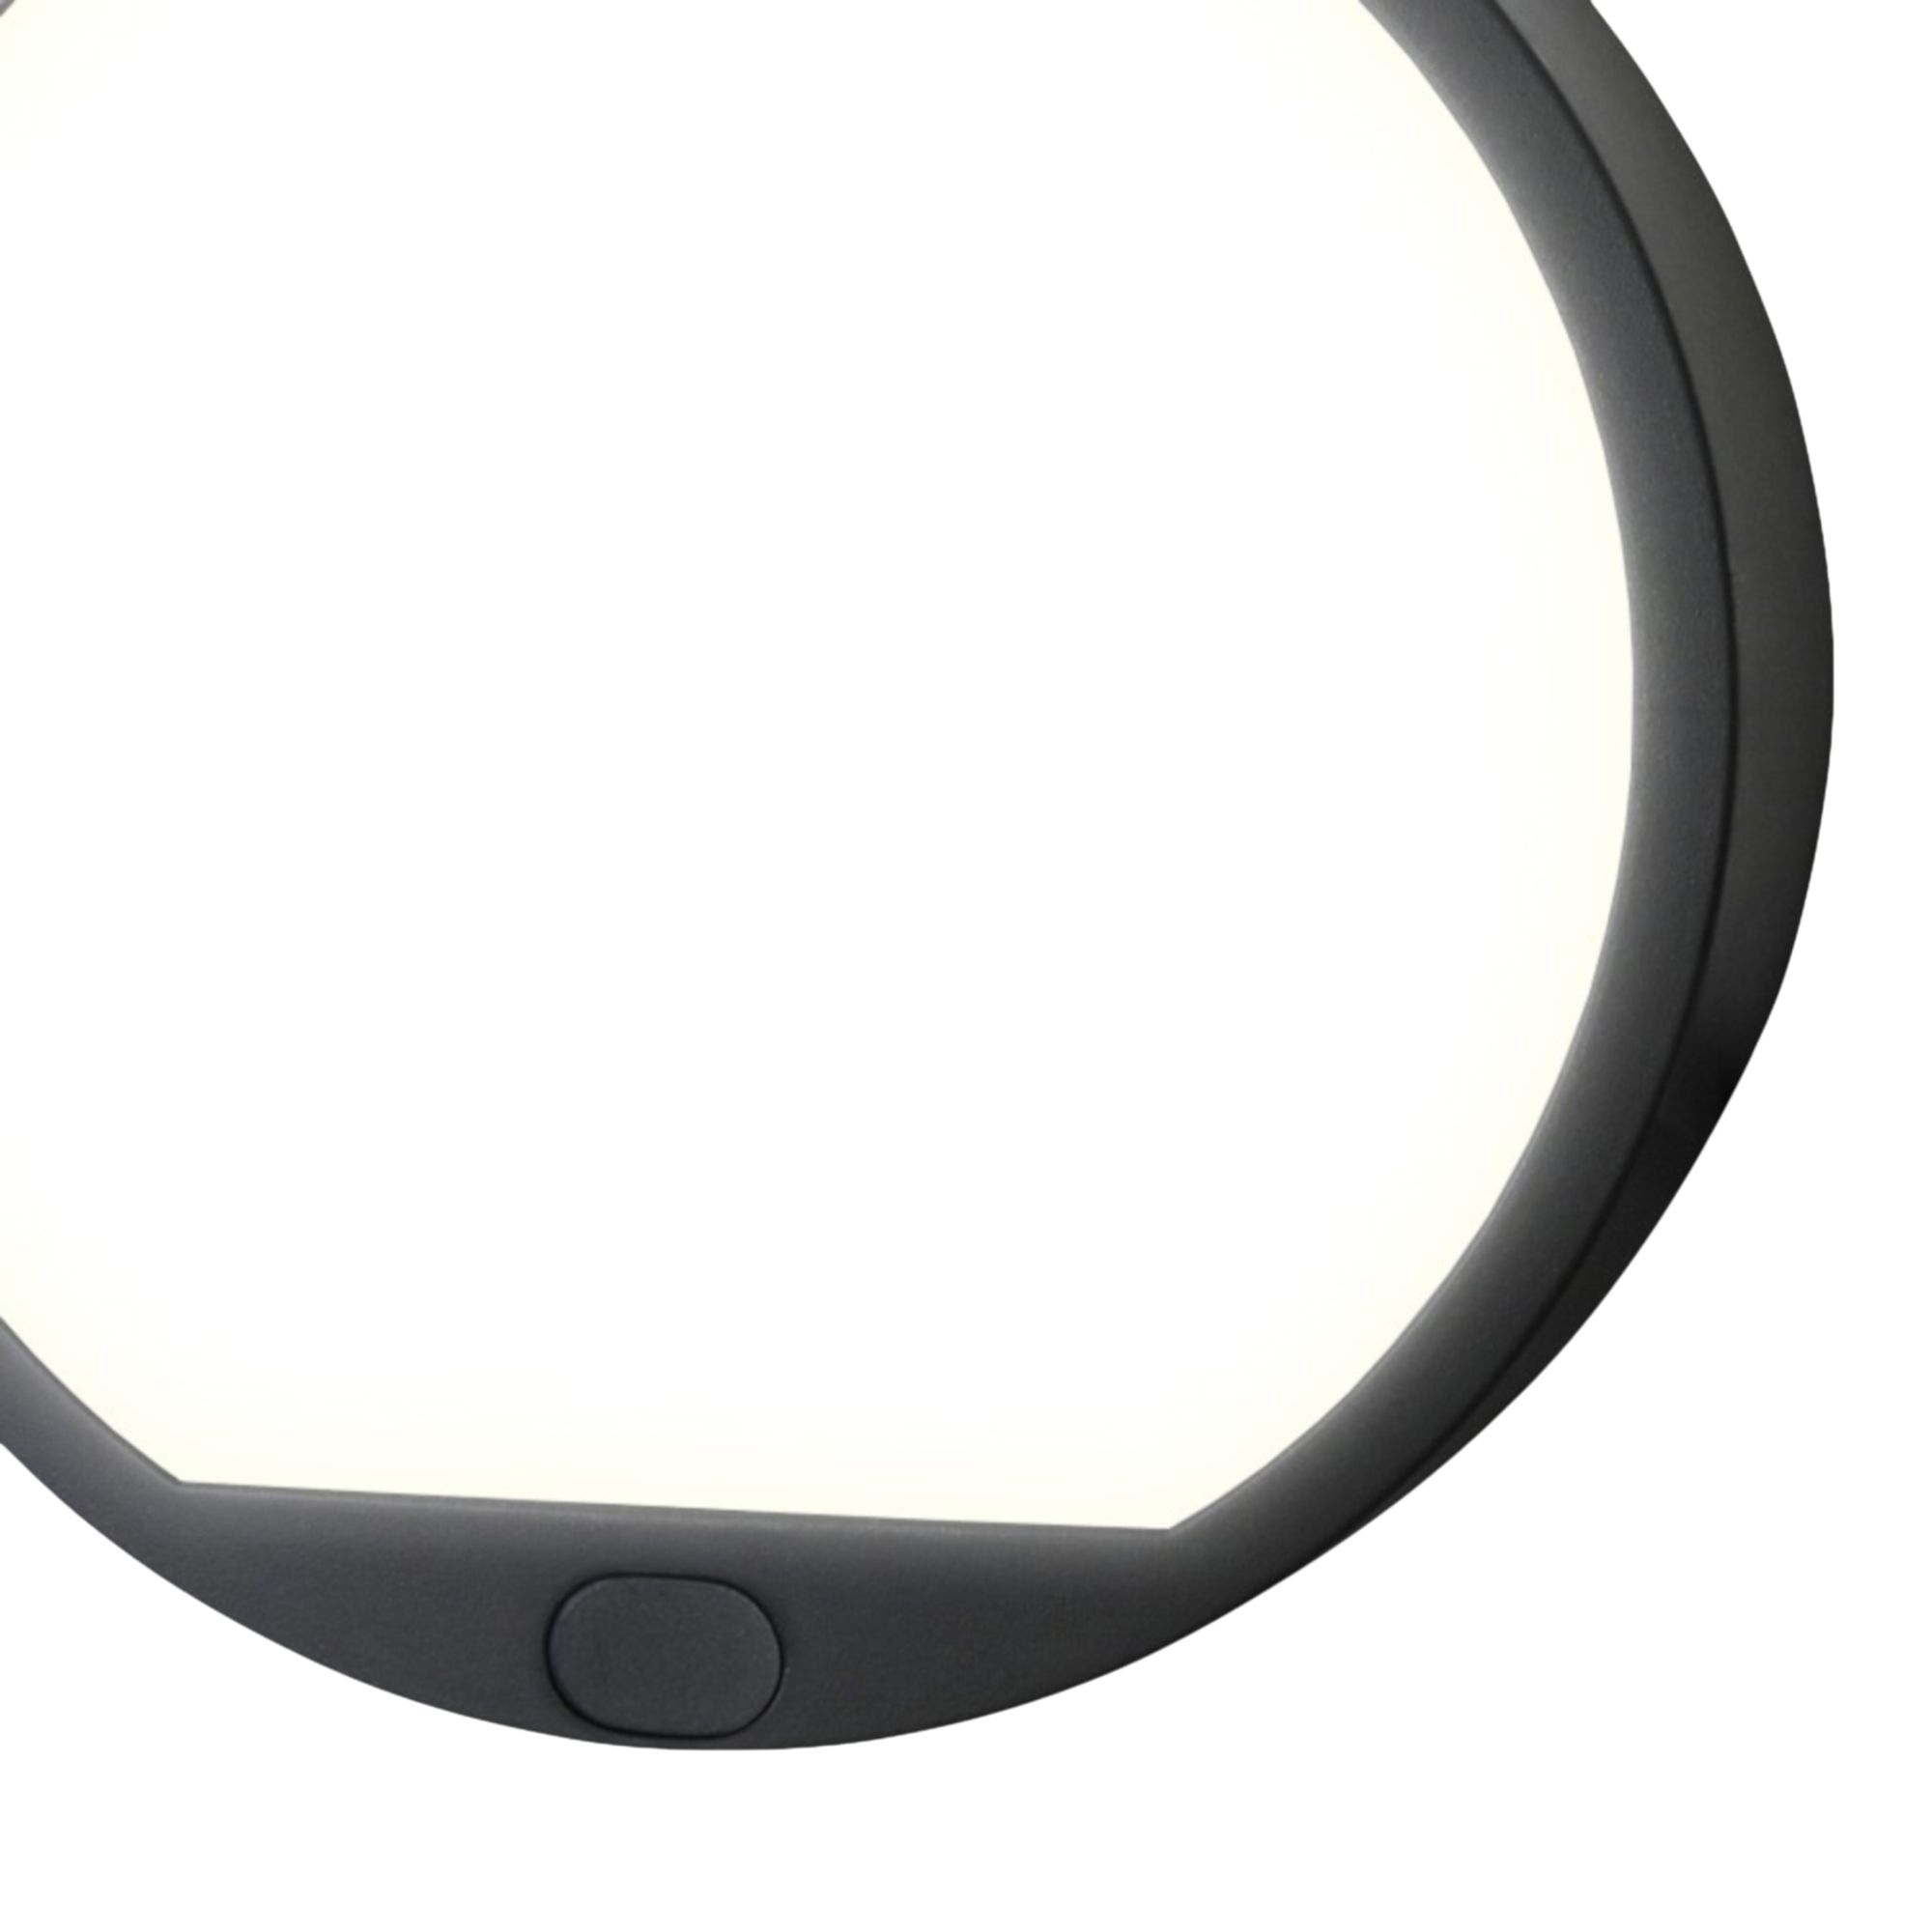 Fixed Black Mains-powered Integrated LED Outdoor Round Wall light 420lm (Dia)12cm